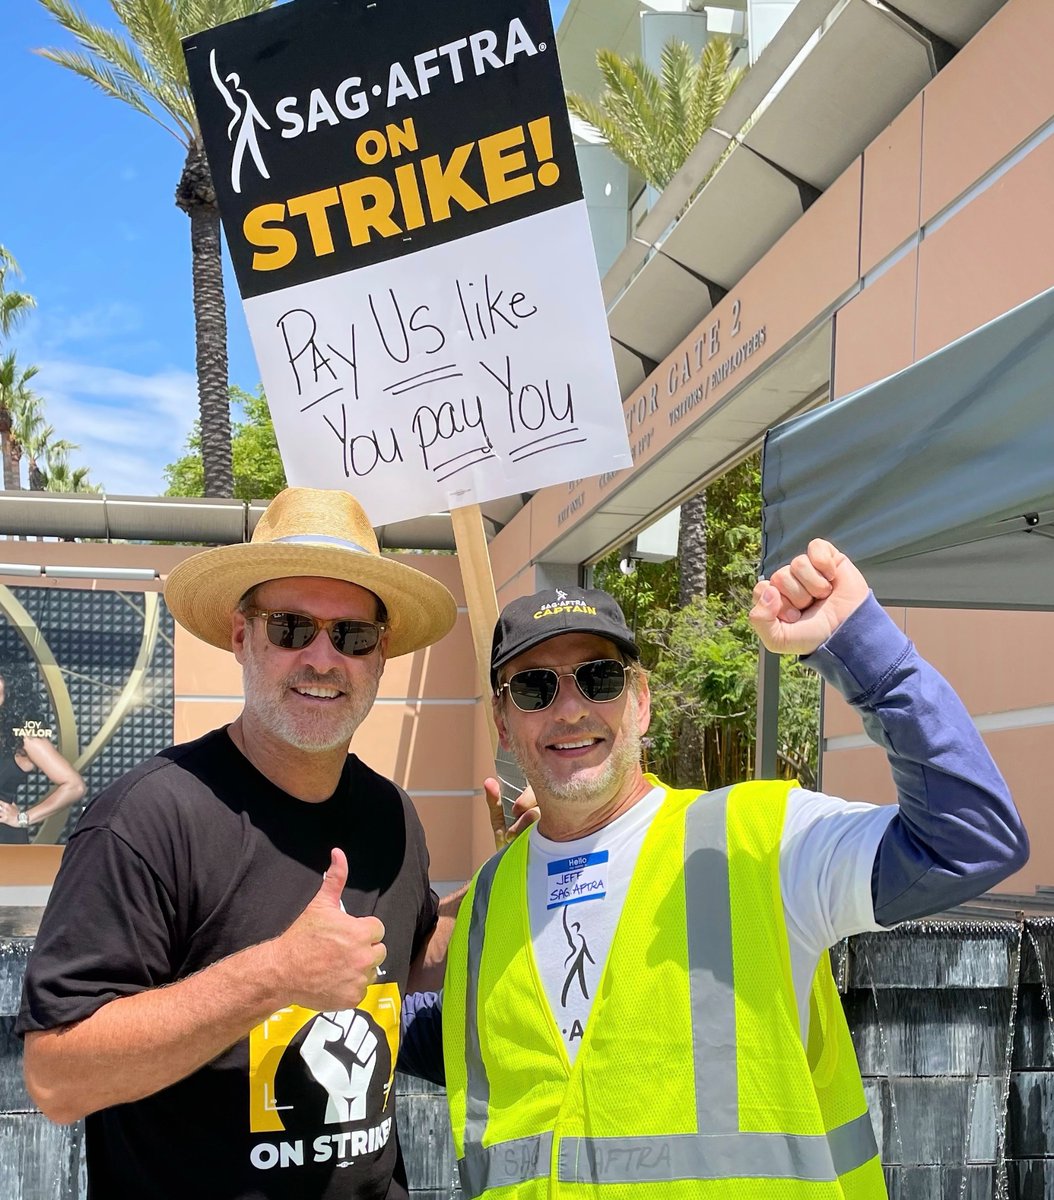 Coupla former NYC HotelMotel Trades Council Local 144 members reunite as #SAGAFTRA members on #FoxLotPicket.
There are so many reasonable working people out here I think Iger & @AMPTP just might be the unreasonable bargaining “partners.” #SAGAFTRAstrong #sagaftrastrike #wgastrike